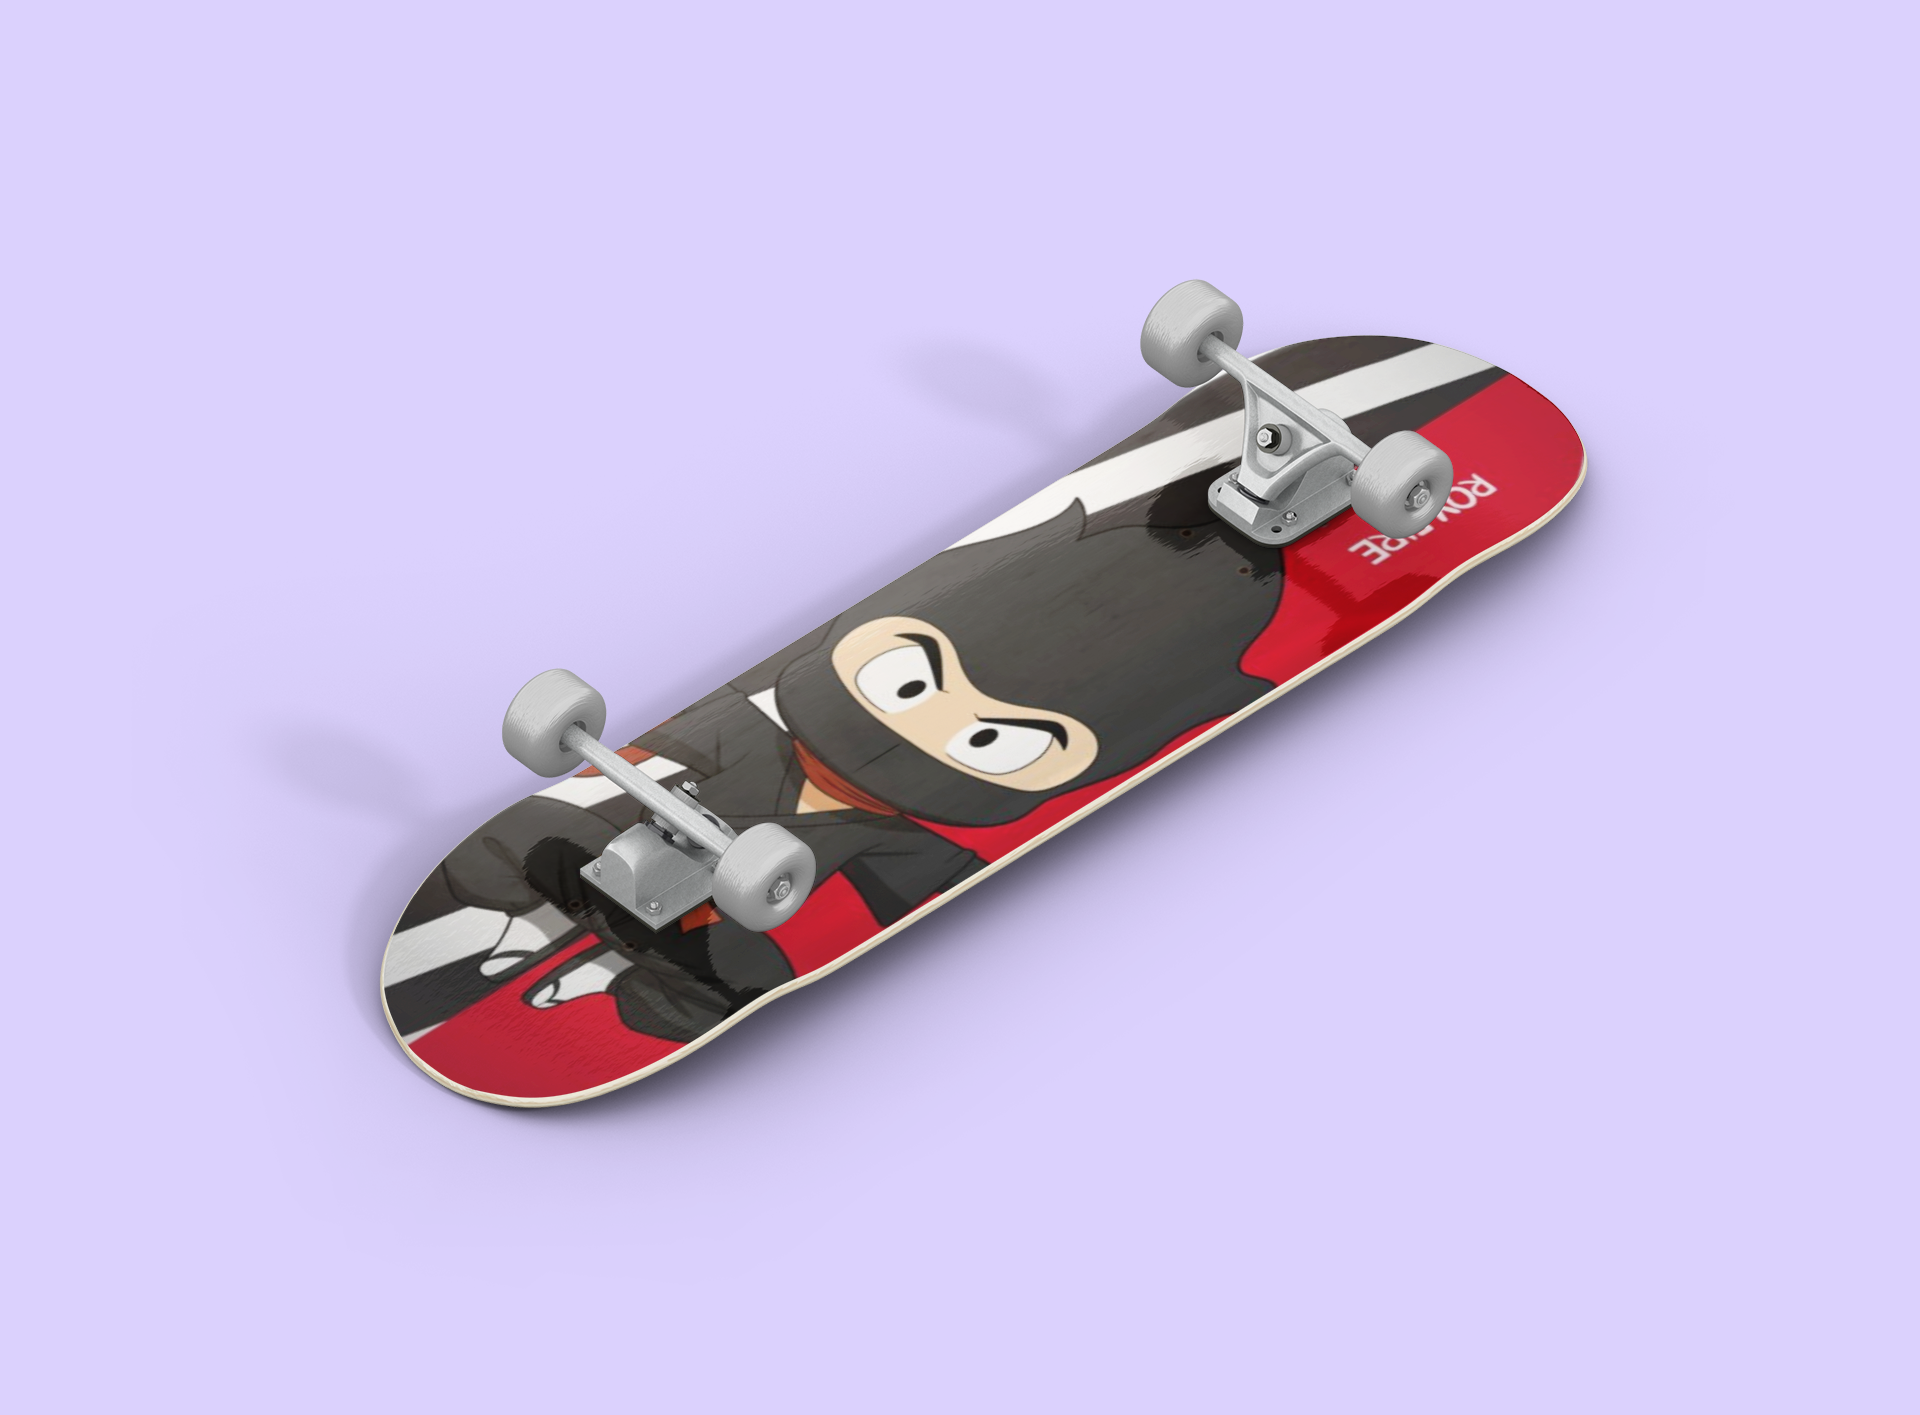 render-mockup-featuring-a-skateboard-lying-on-a-solid-color-surface-384-el.png